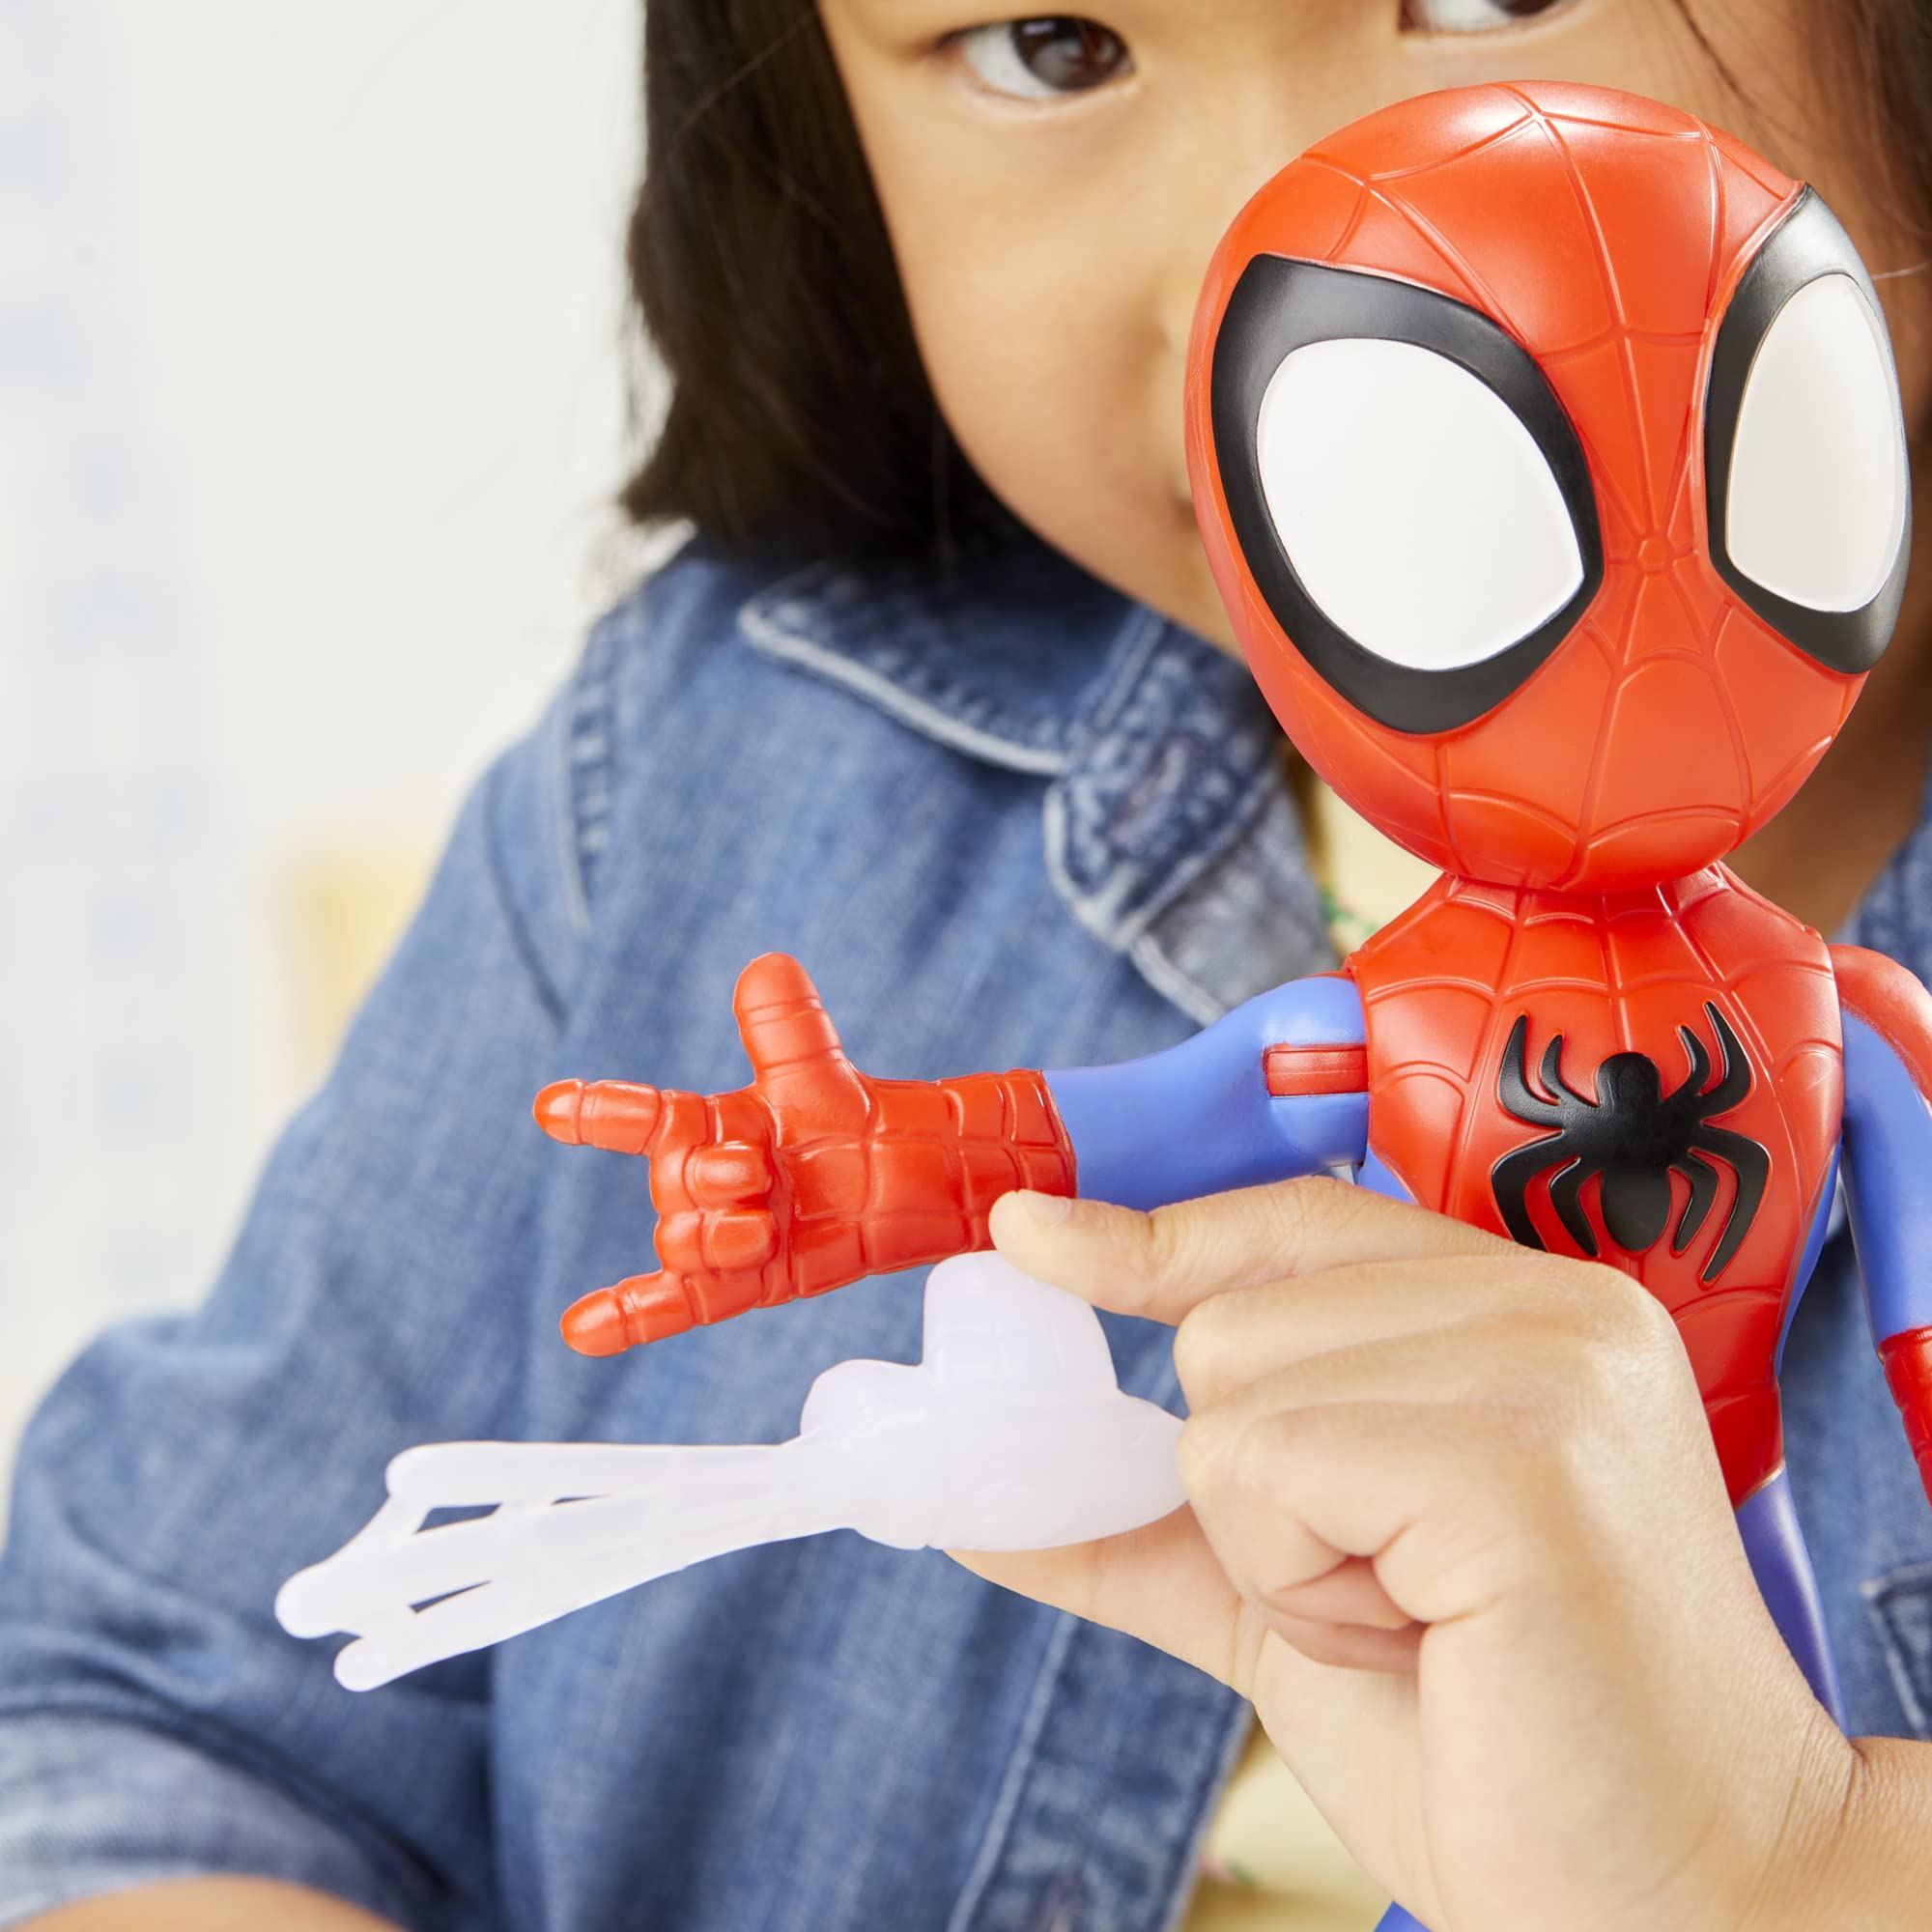 Marvel Spidey and His Amazing Friends Supersized Hero Multipack, 3 Large Action Figures, Preschool Super Hero Toy, Ages 3 and Up, 9 Inches (Amazon Exclusive)